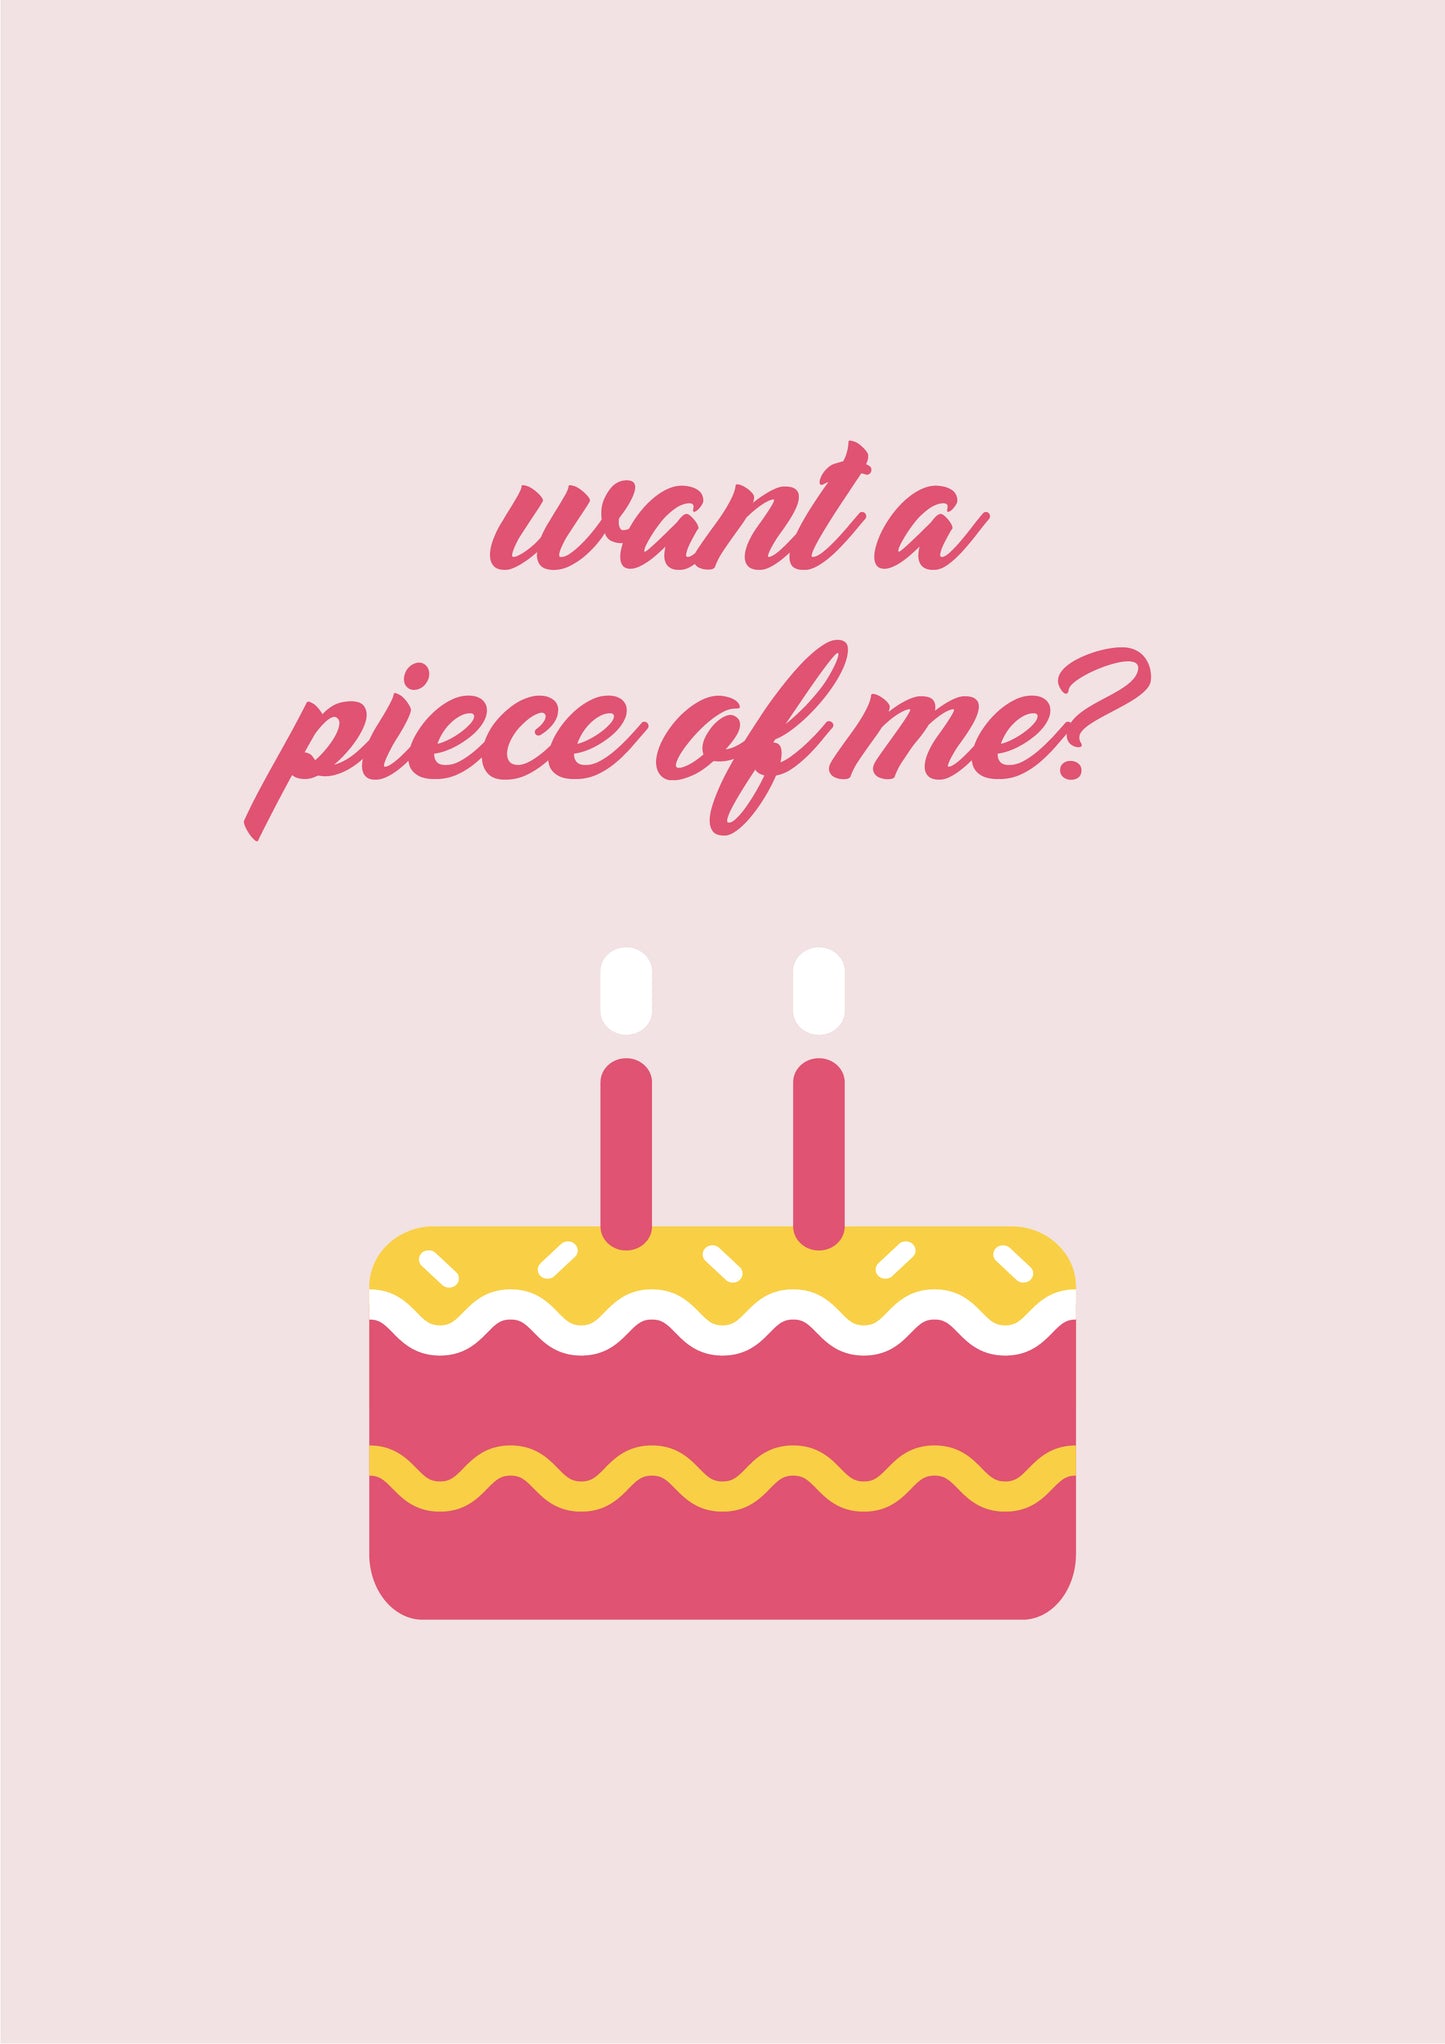 Want A Piece Of Me?